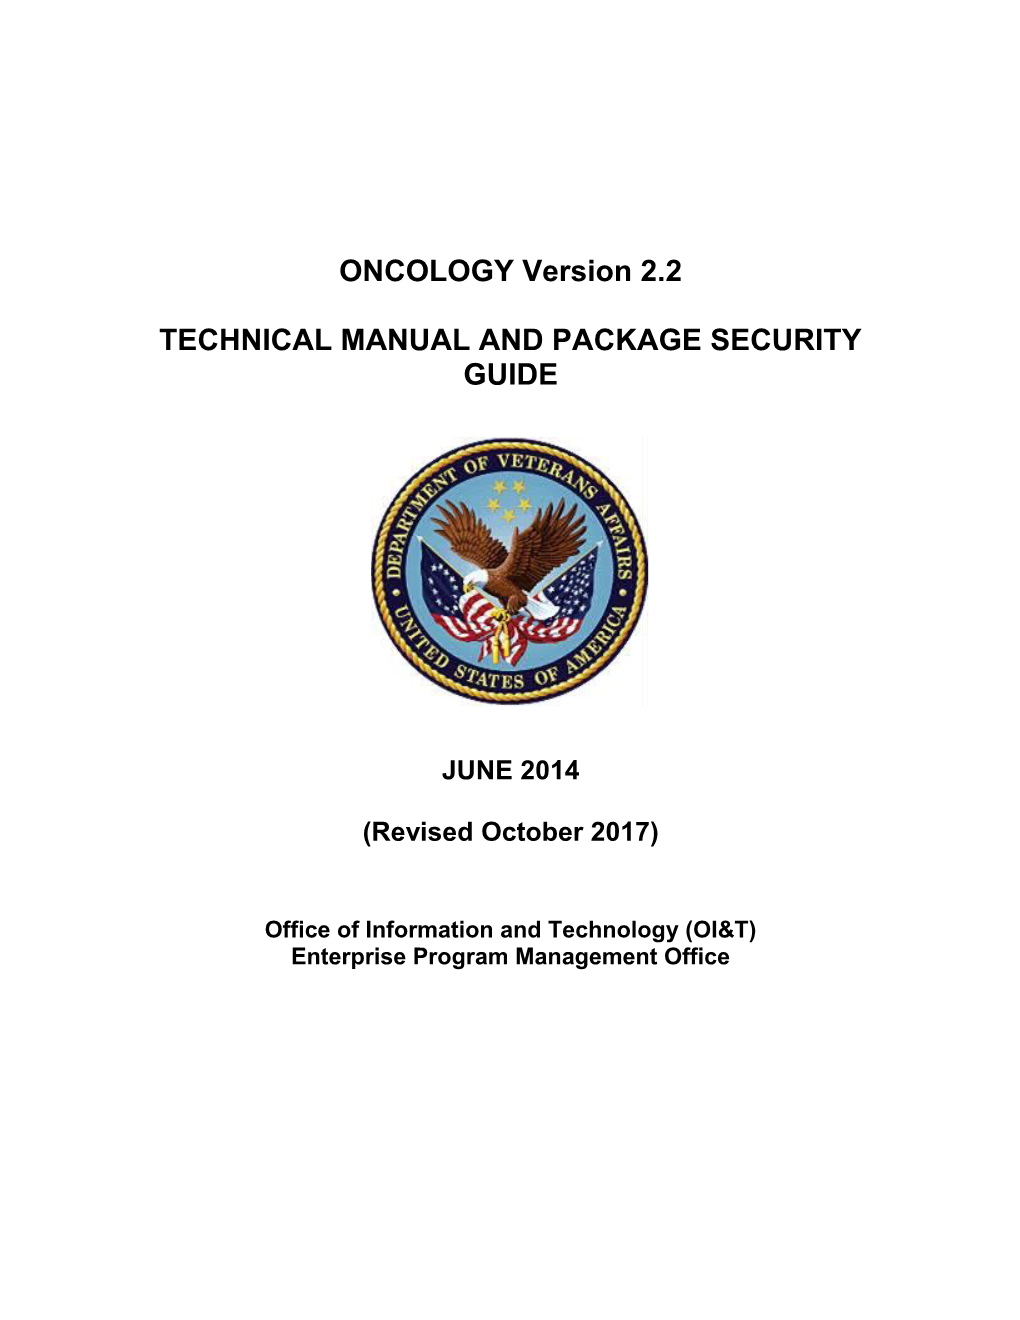 Technical Manual and Package Security Guide